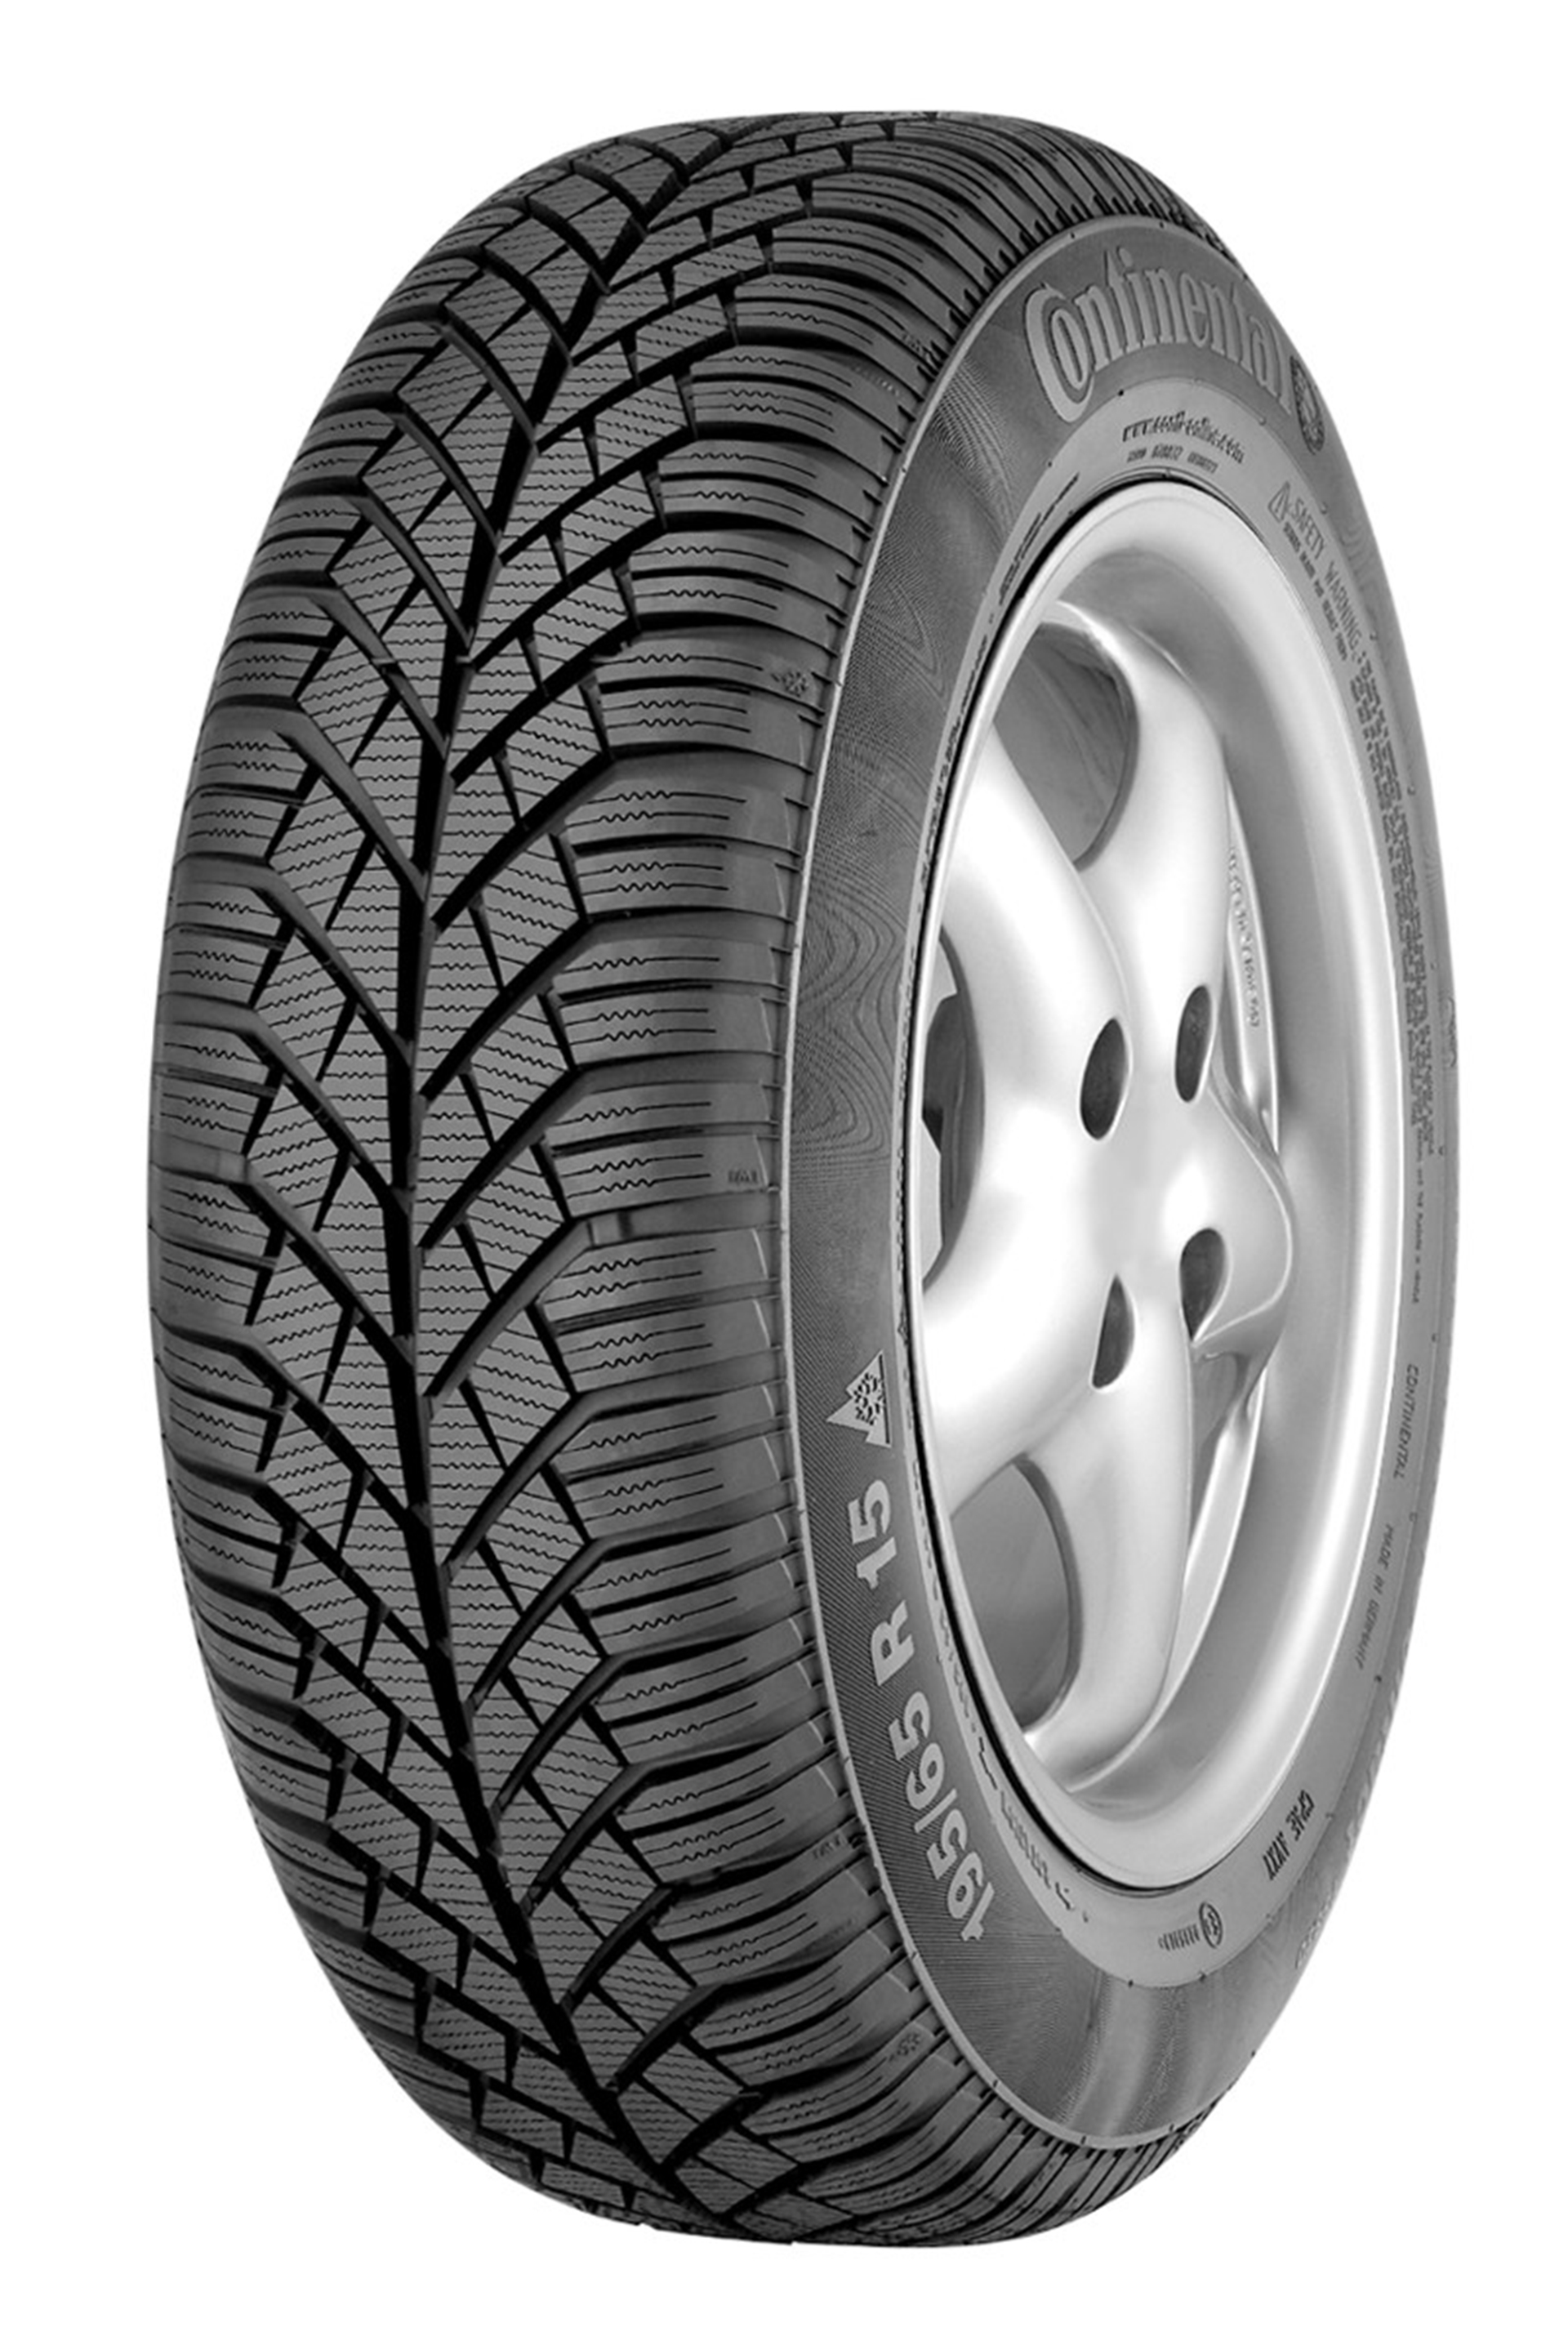 CONTINENTAL WINTER TYRES NAMED BEST BUYS